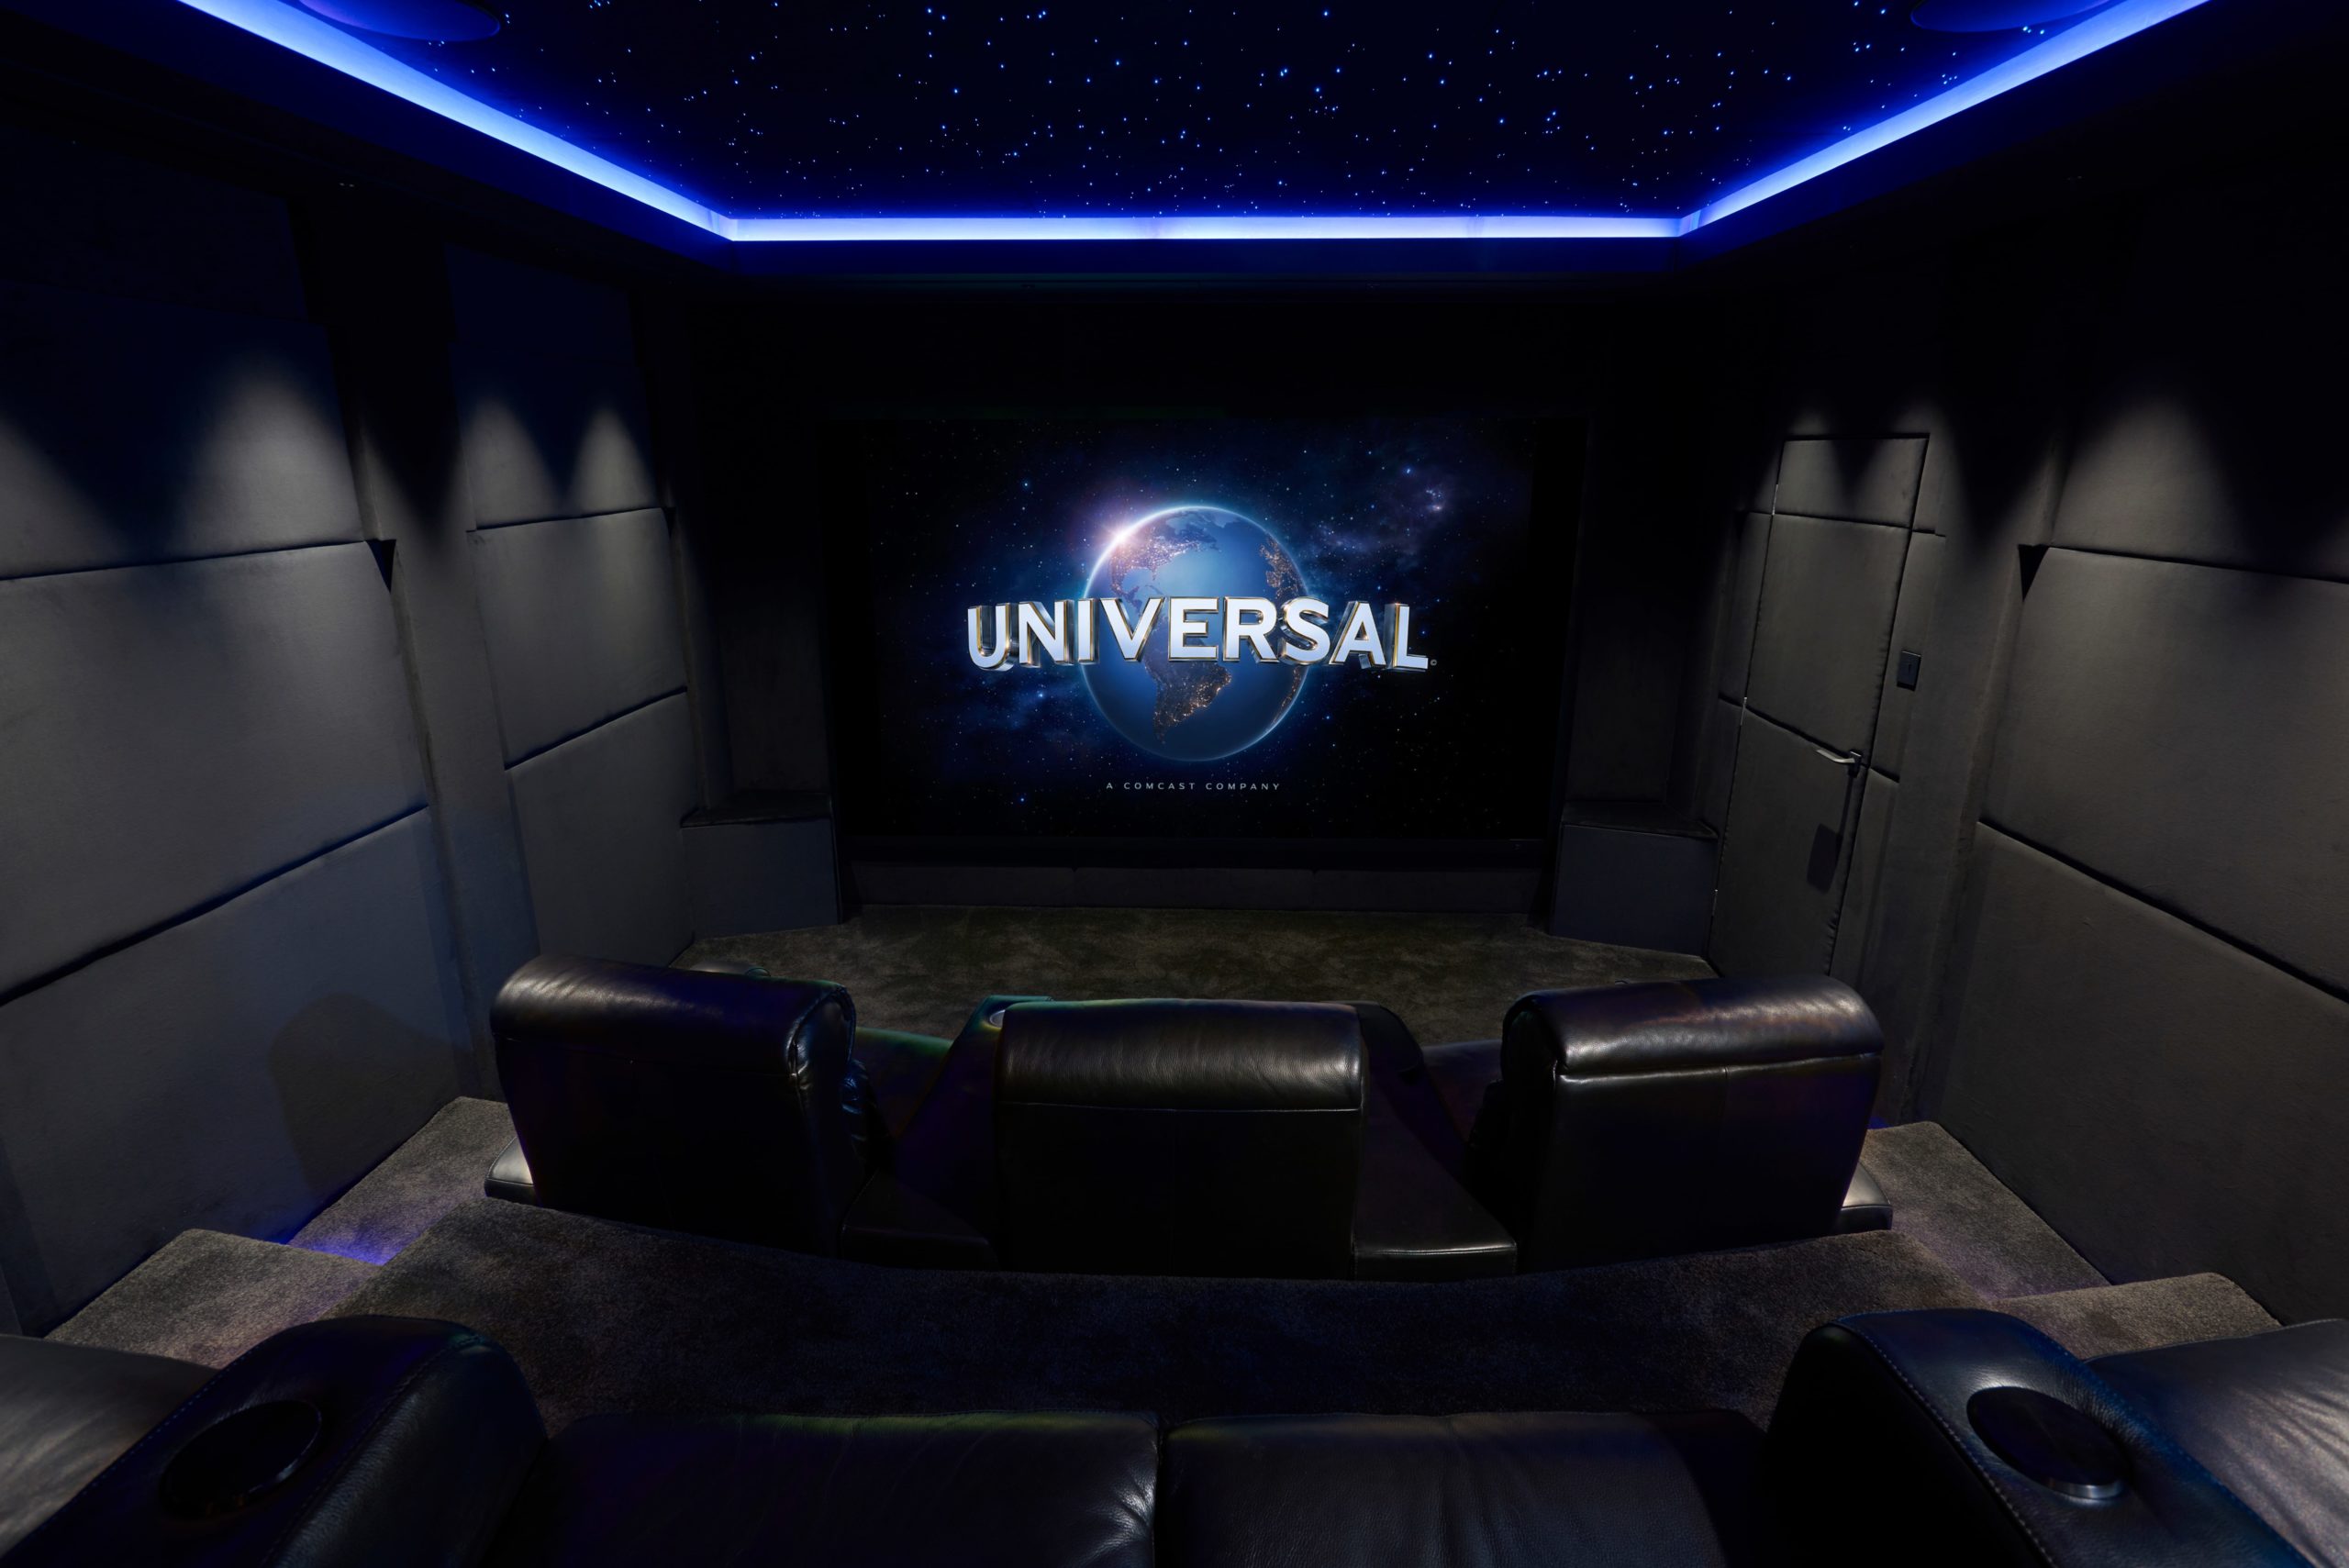 The Roxy cinema with Universal on screen with LED star ceiling